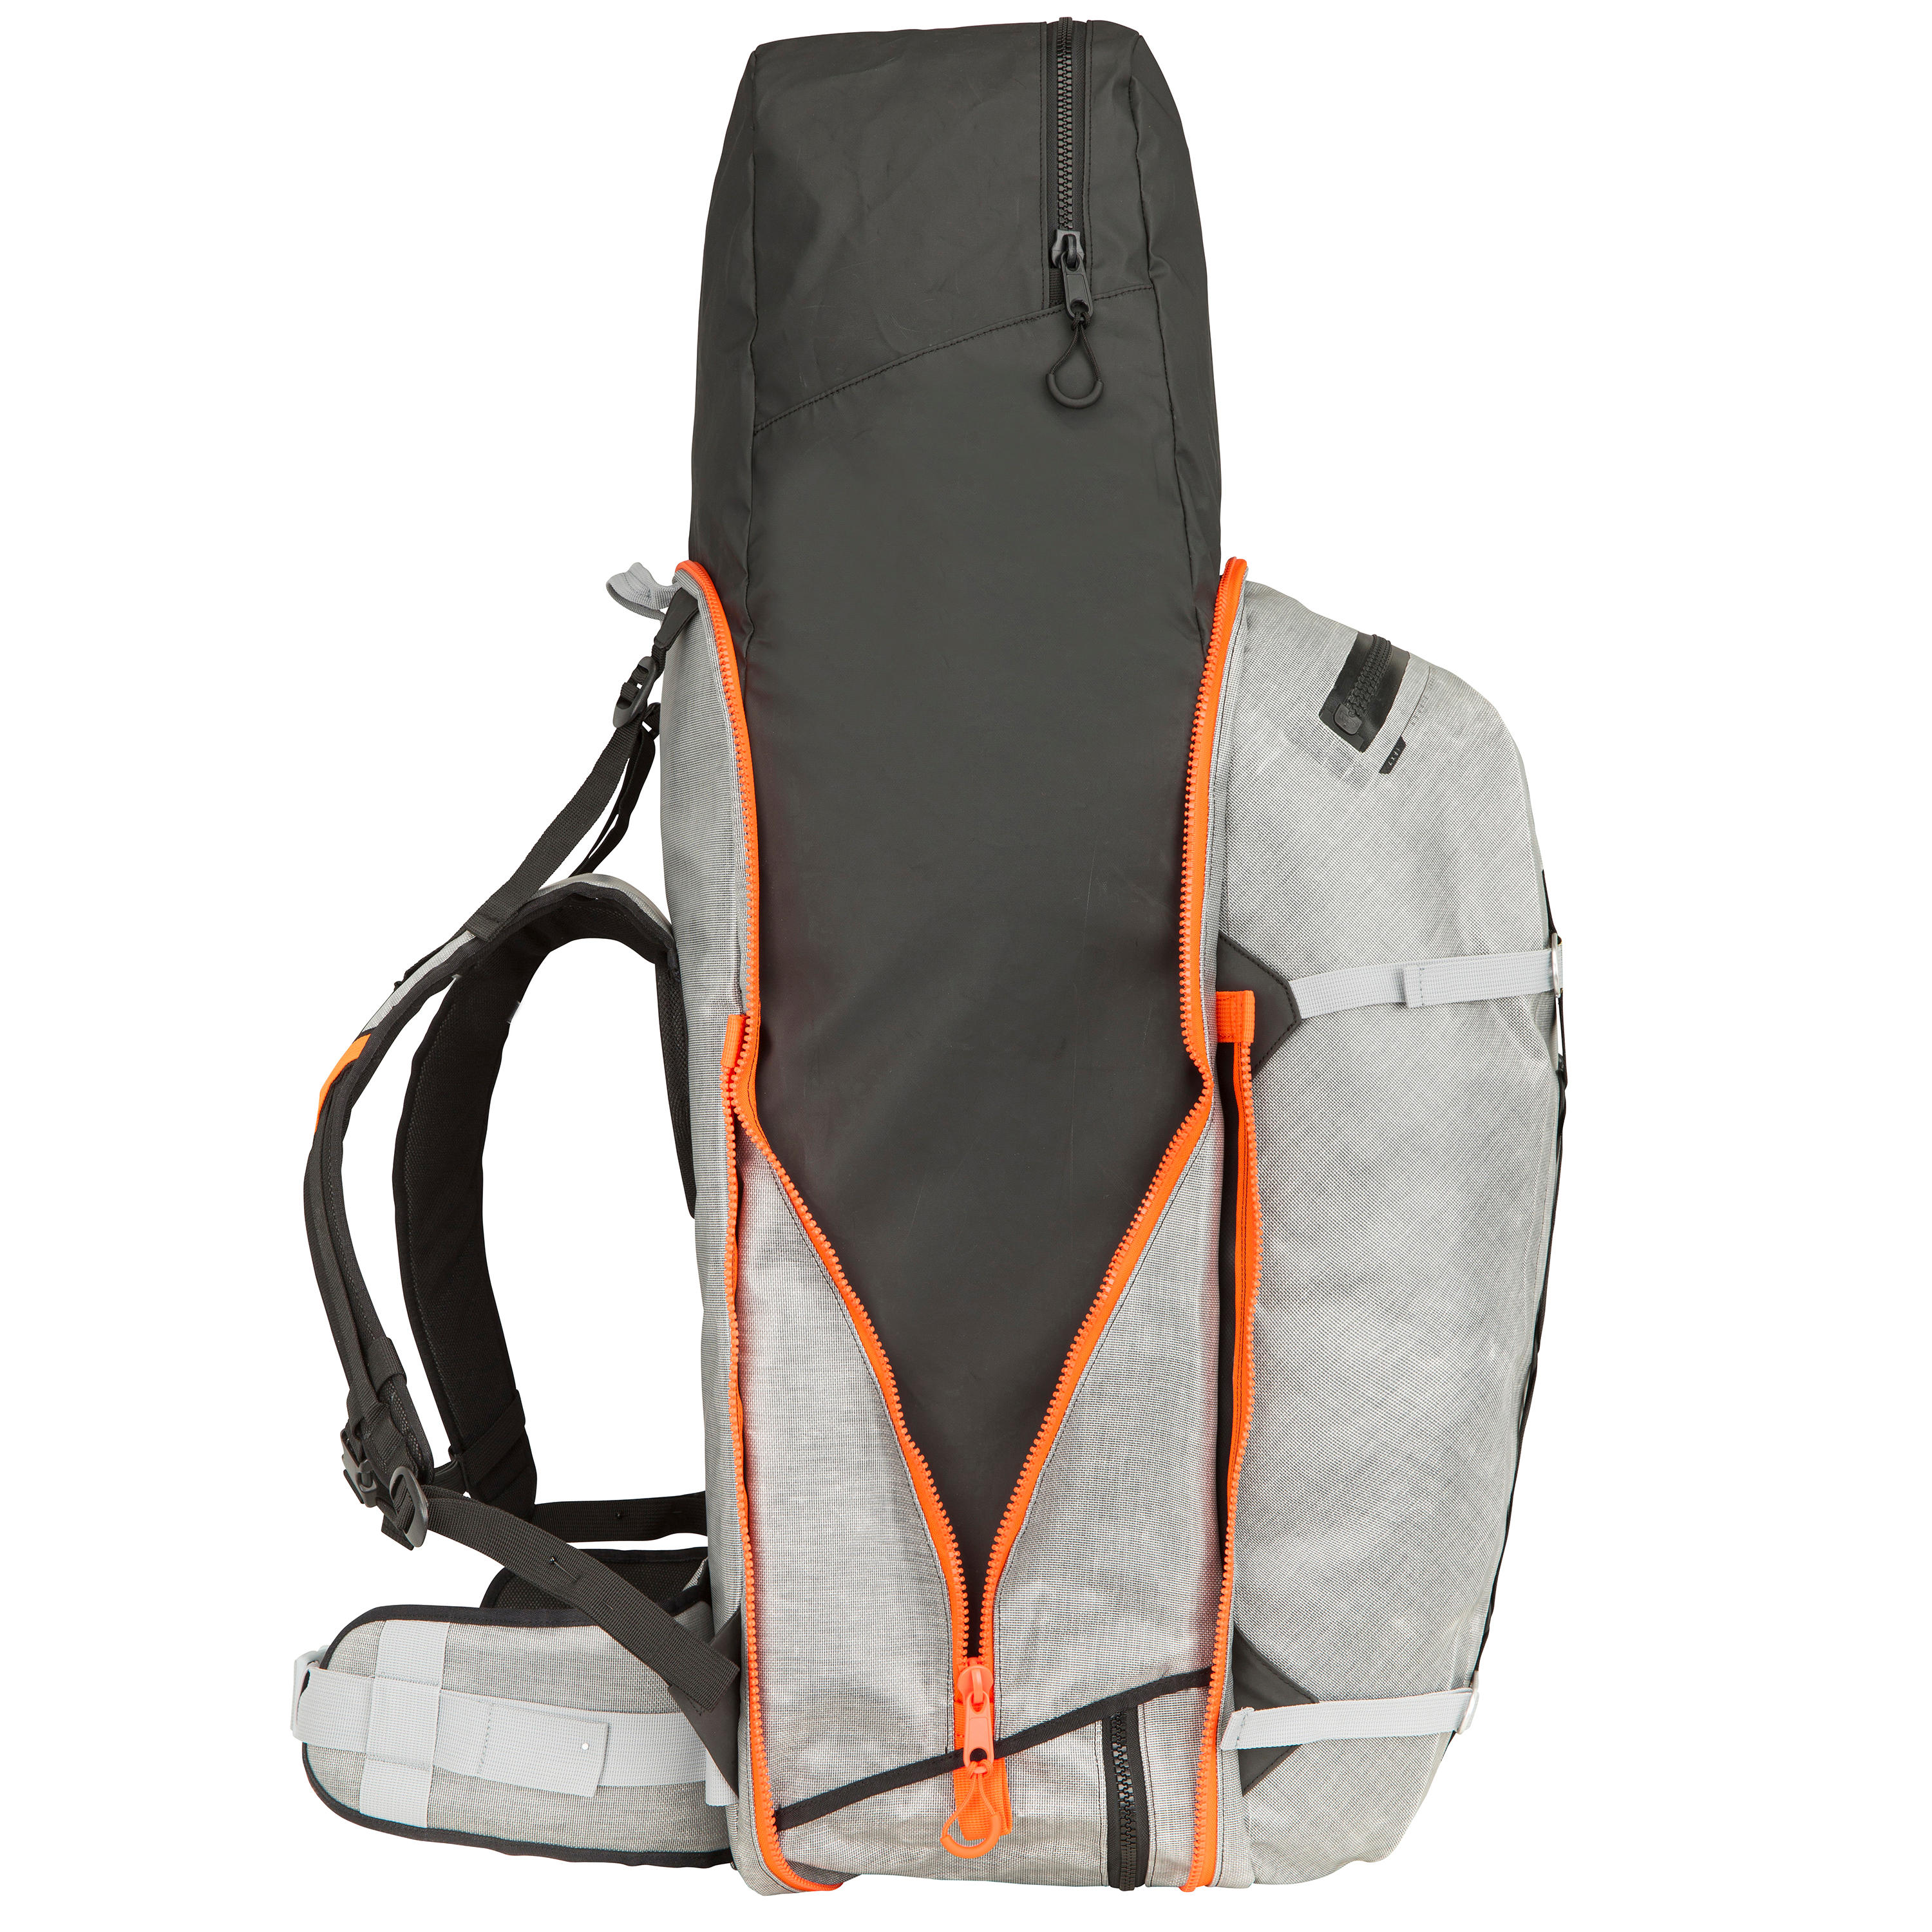 Stand-Up Paddle Convertible Waterproof Backpack 3/21